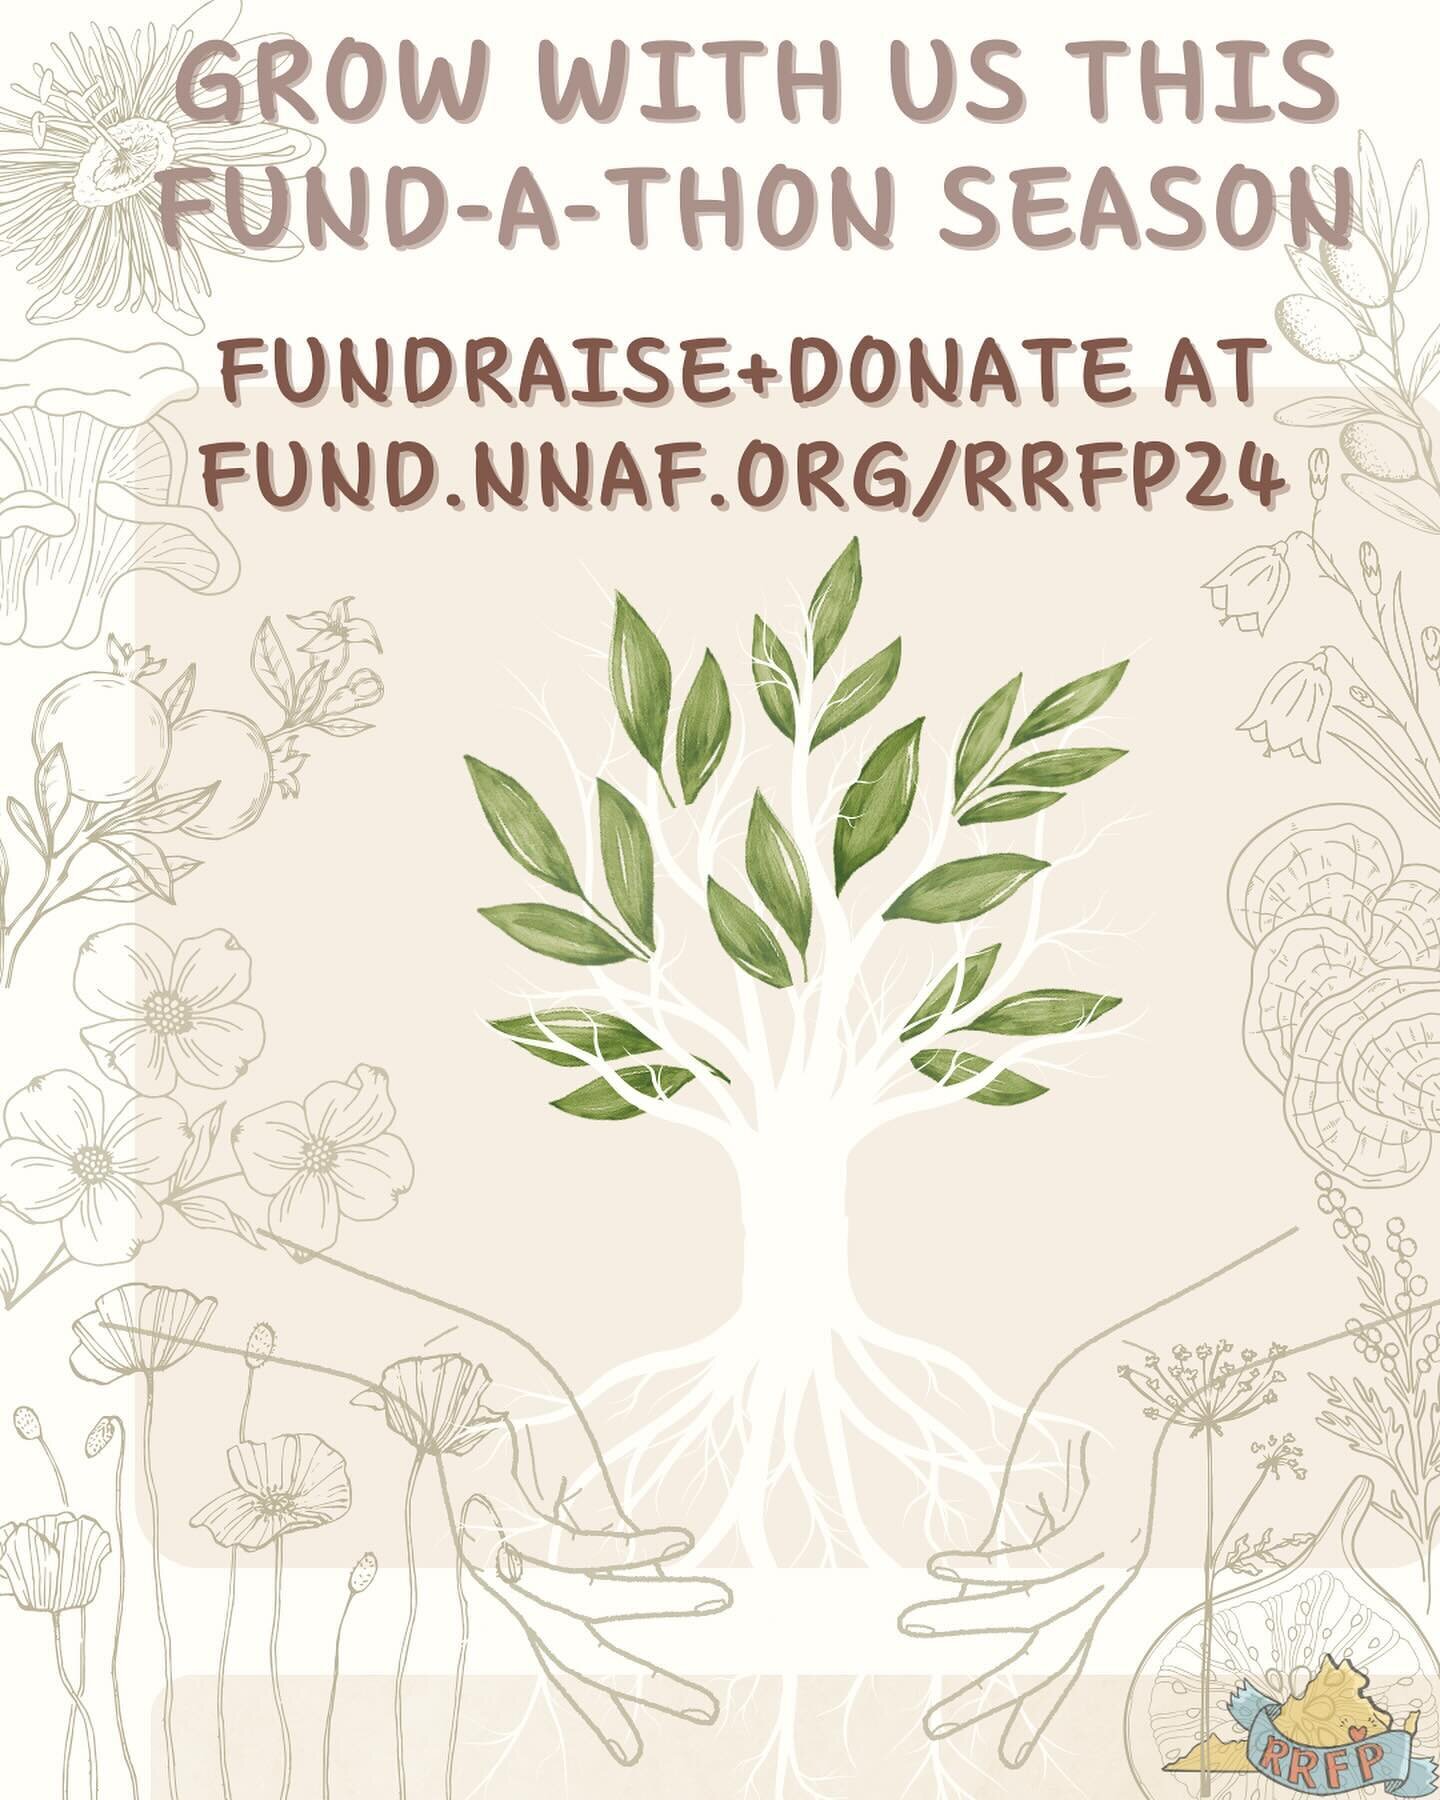 FUND-A-THON 2024 IS LIVE! Link in bio! Swipe to see more info. &lsquo;Growth&rsquo; resonated with us as RRFP turns 21 - we&rsquo;re celebrating a new leaf for each new year to signify our ongoing transformation. Join us in strengthening our ecosyste